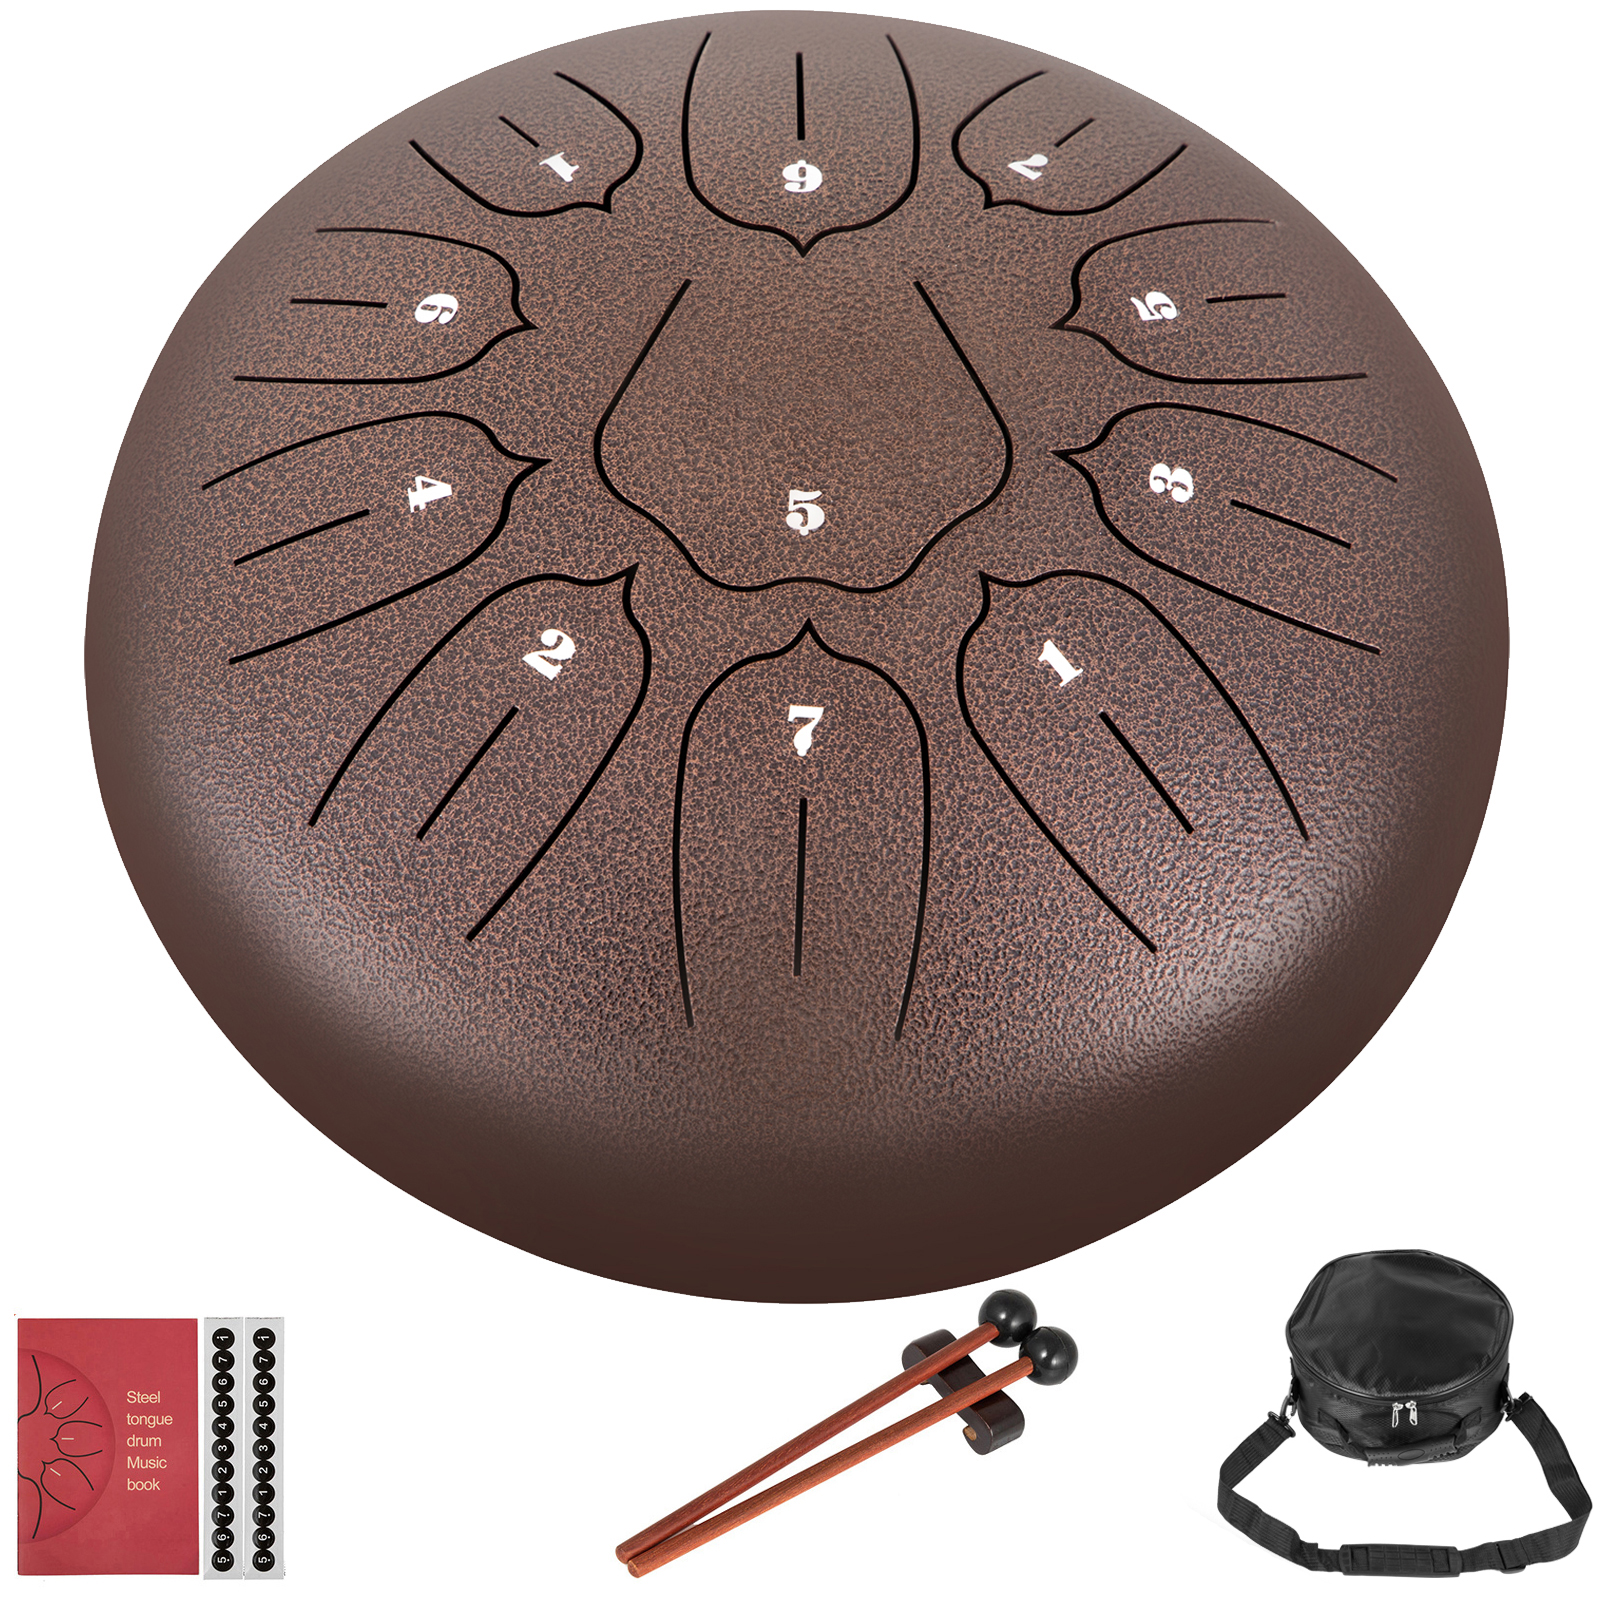 Steel Tongue Drum 11 Notes 10 inches Percussion Instrument with Bag, Book, Mallets, Finger Picks от Vevor Many GEOs